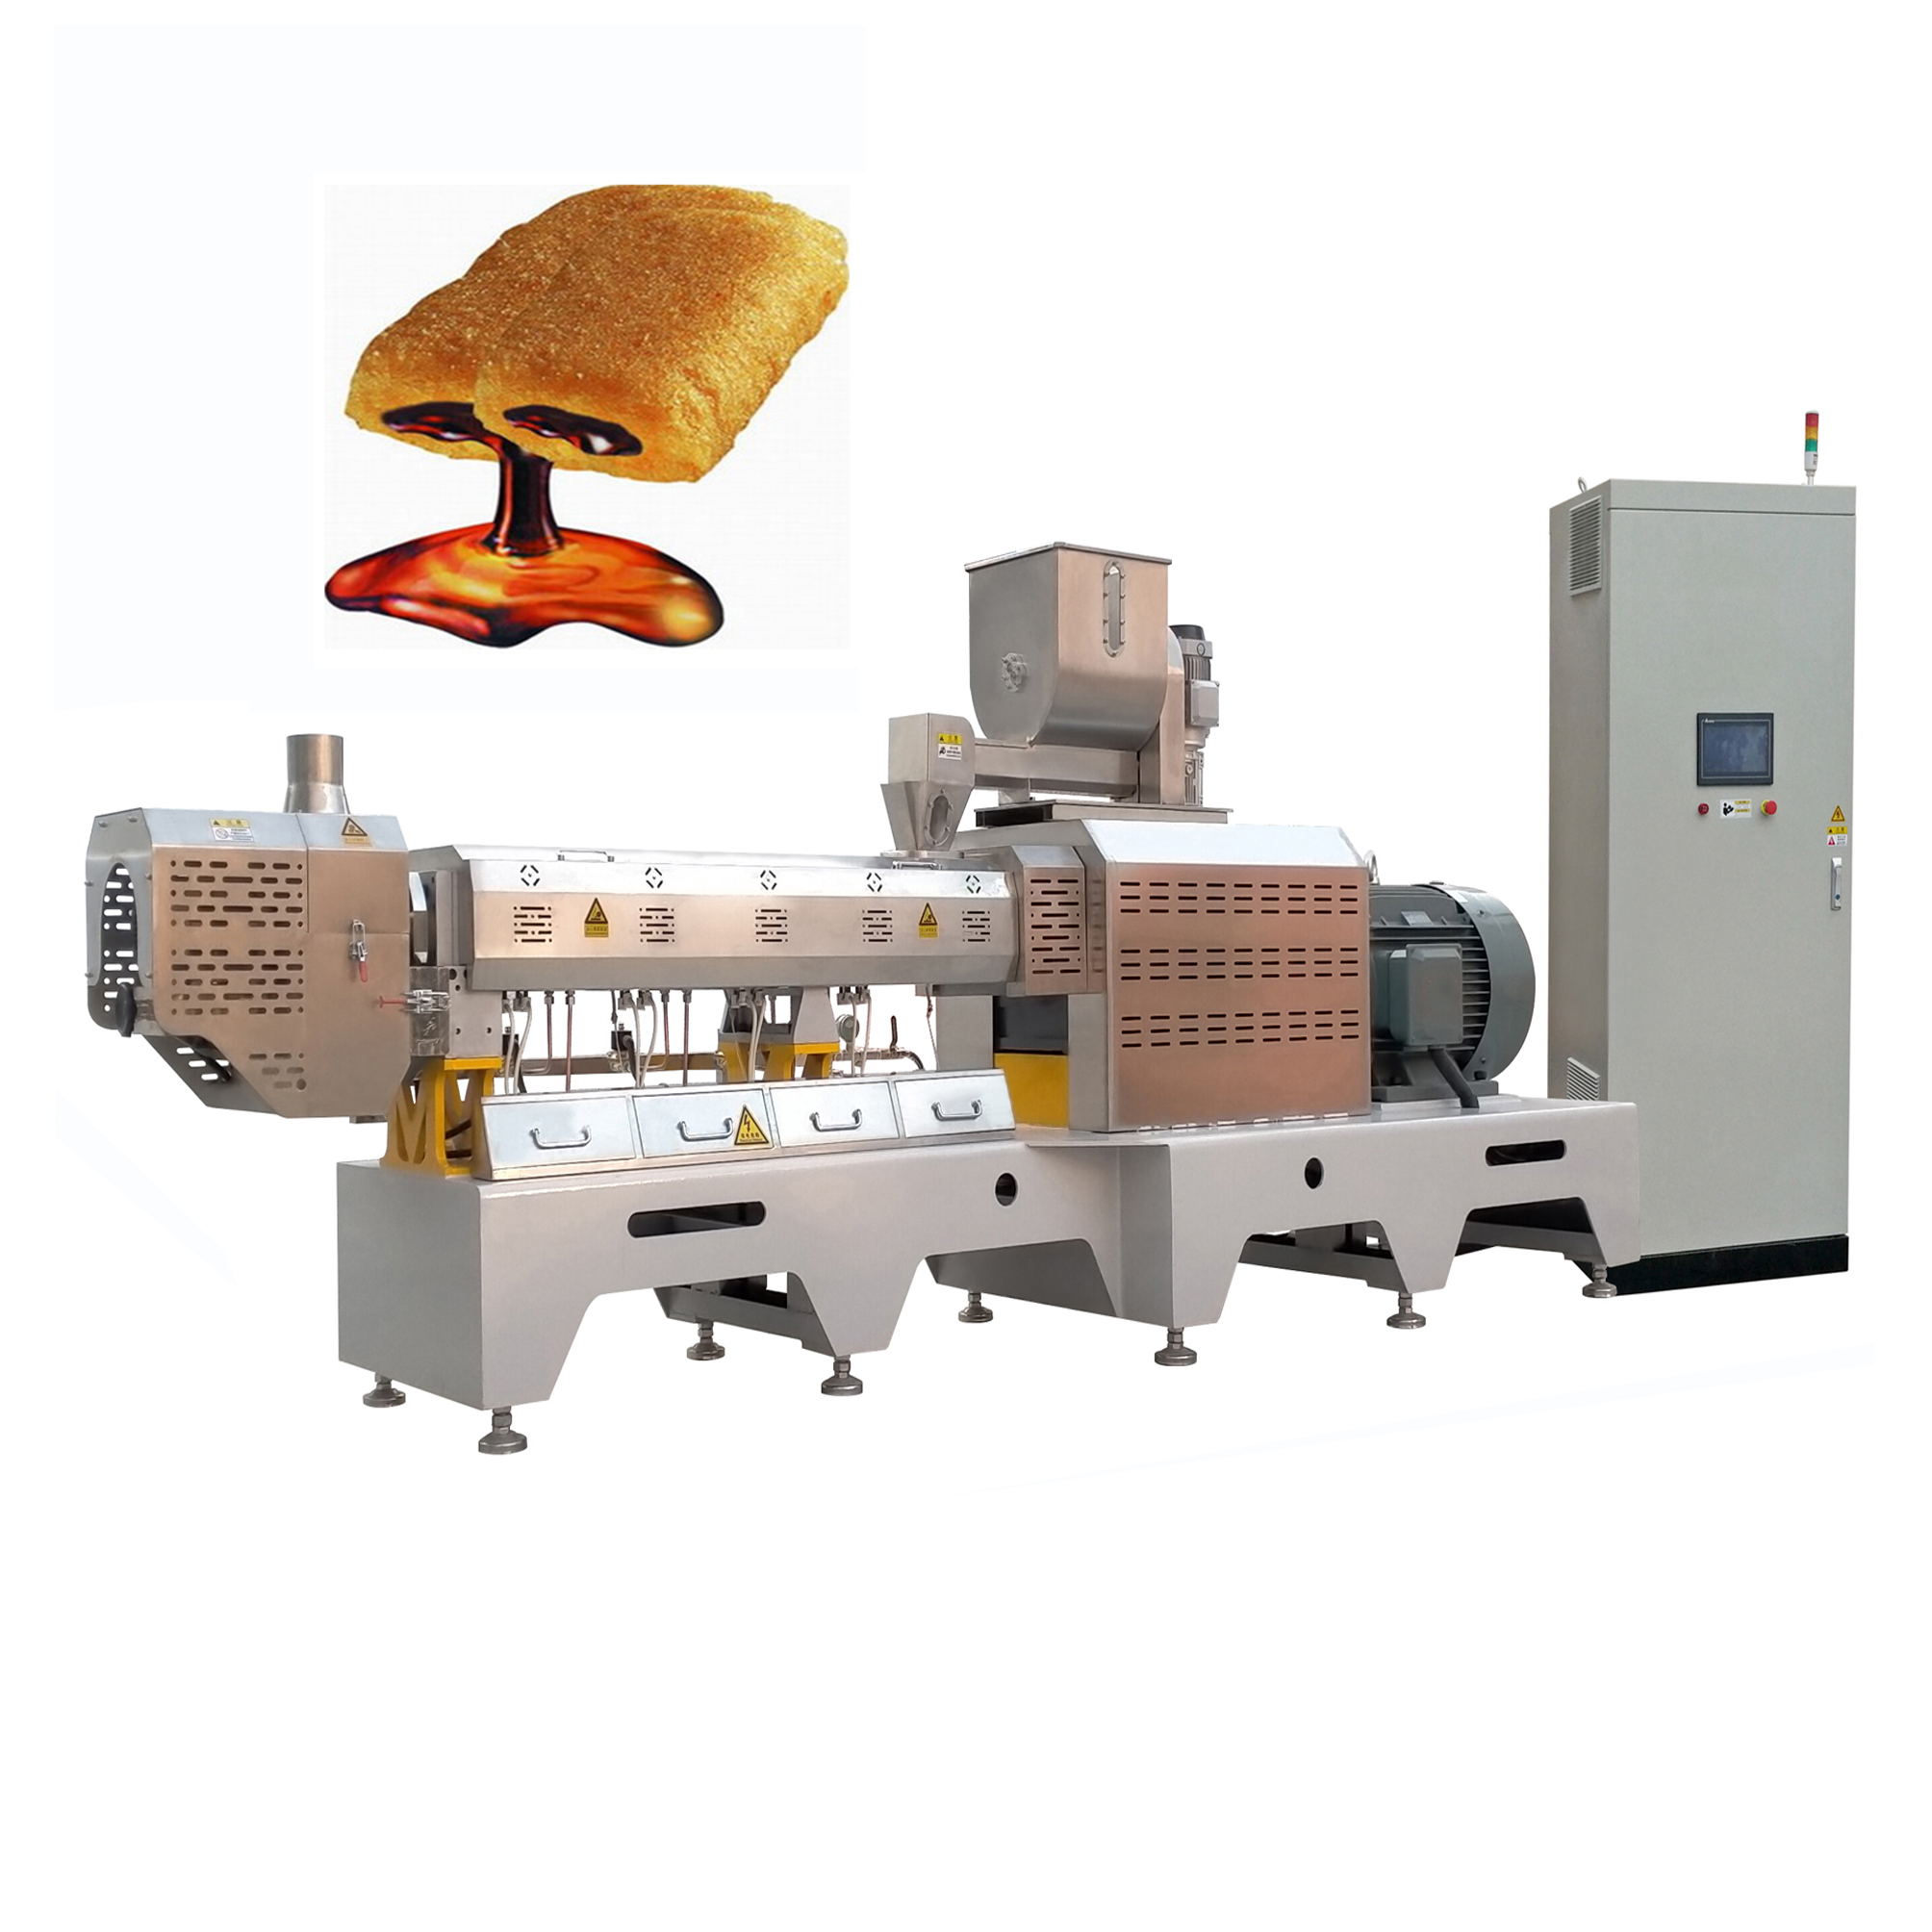 core filled snack production line order from south africe client